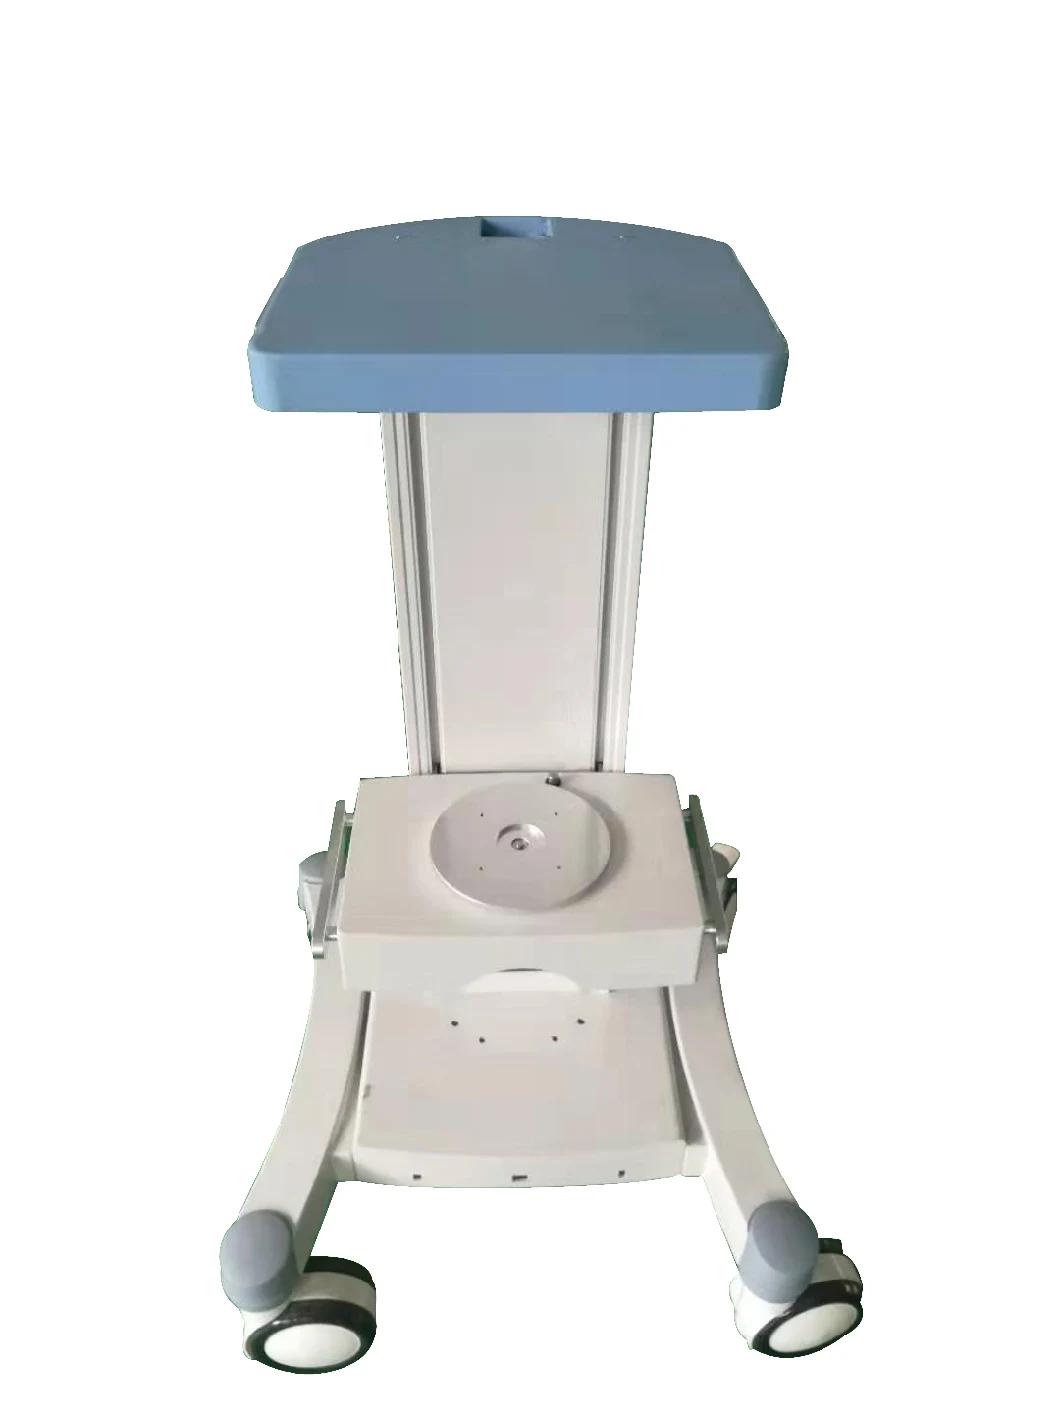 Customized Trolley for Ventilator Anesthesia Patient ECG Machine Laser Beauty Machine